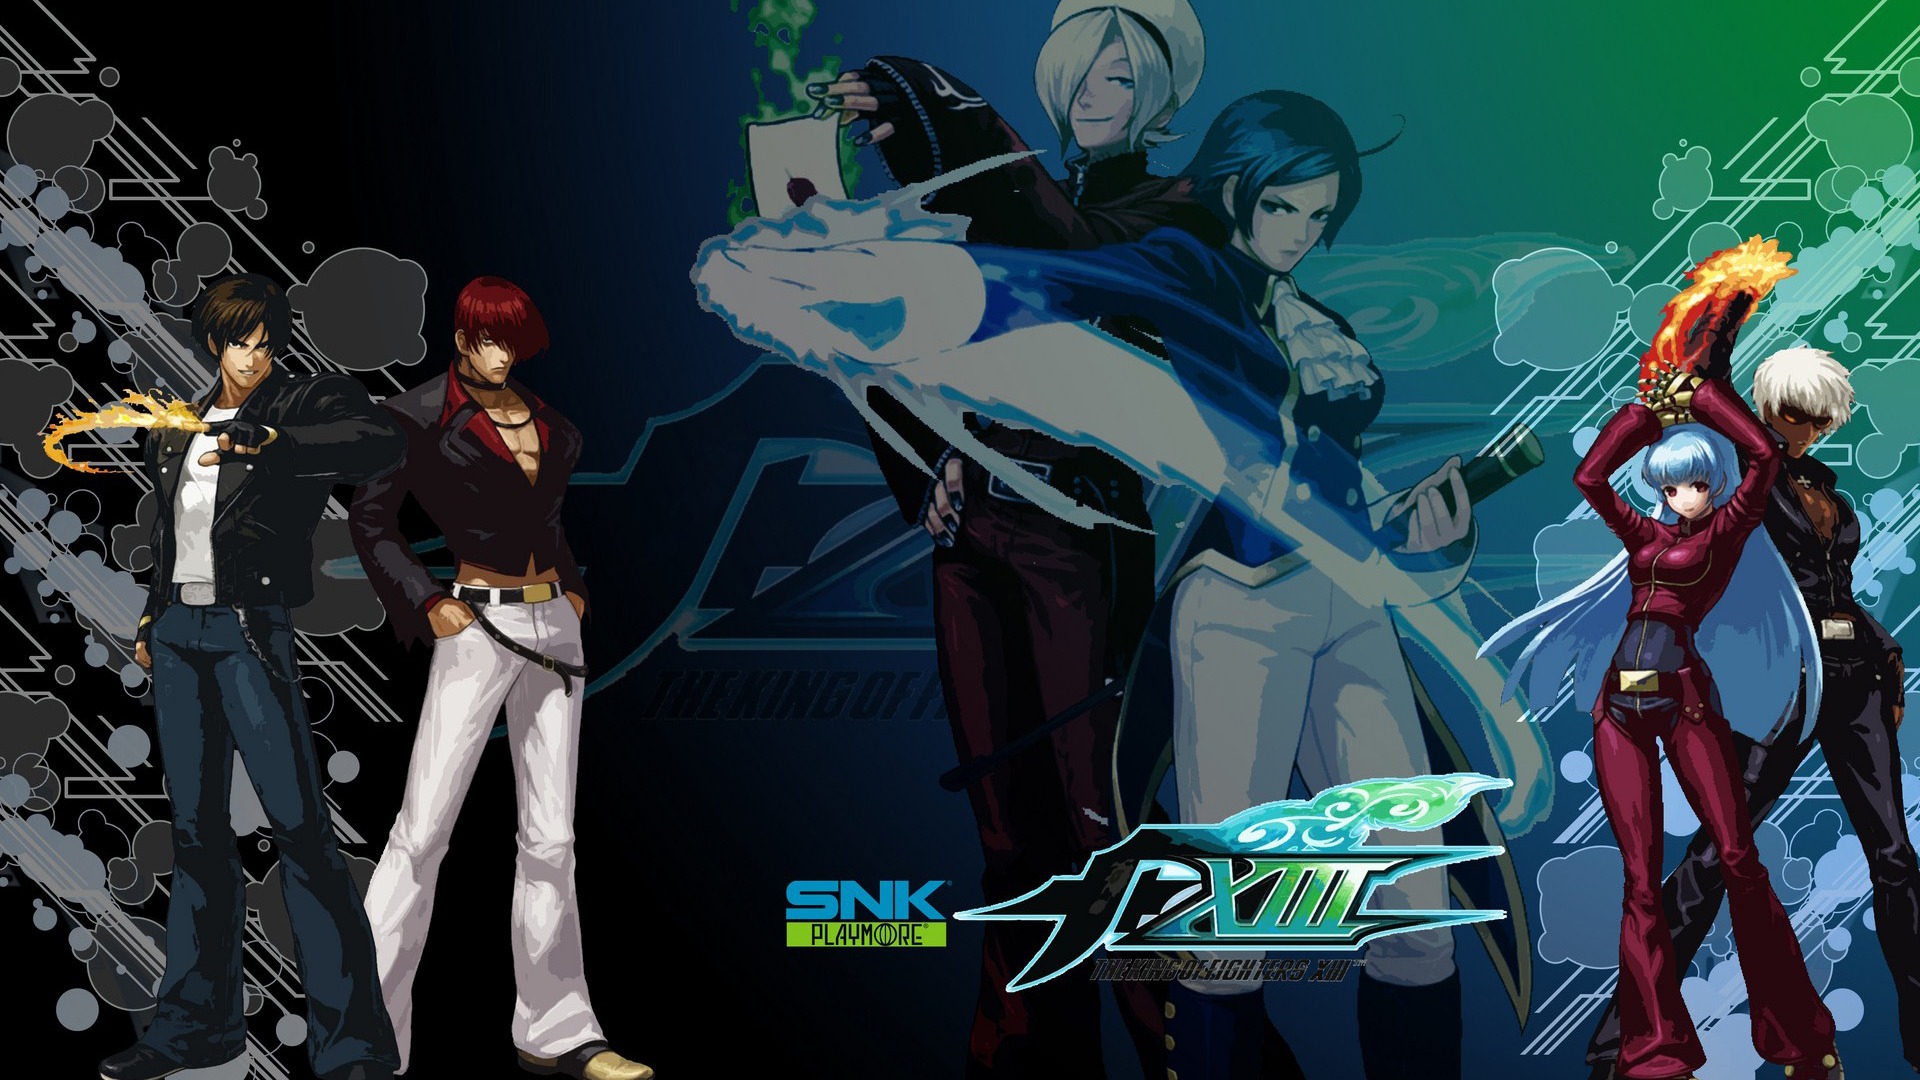 The King of Fighters XIII wallpapers #4 - 1920x1080